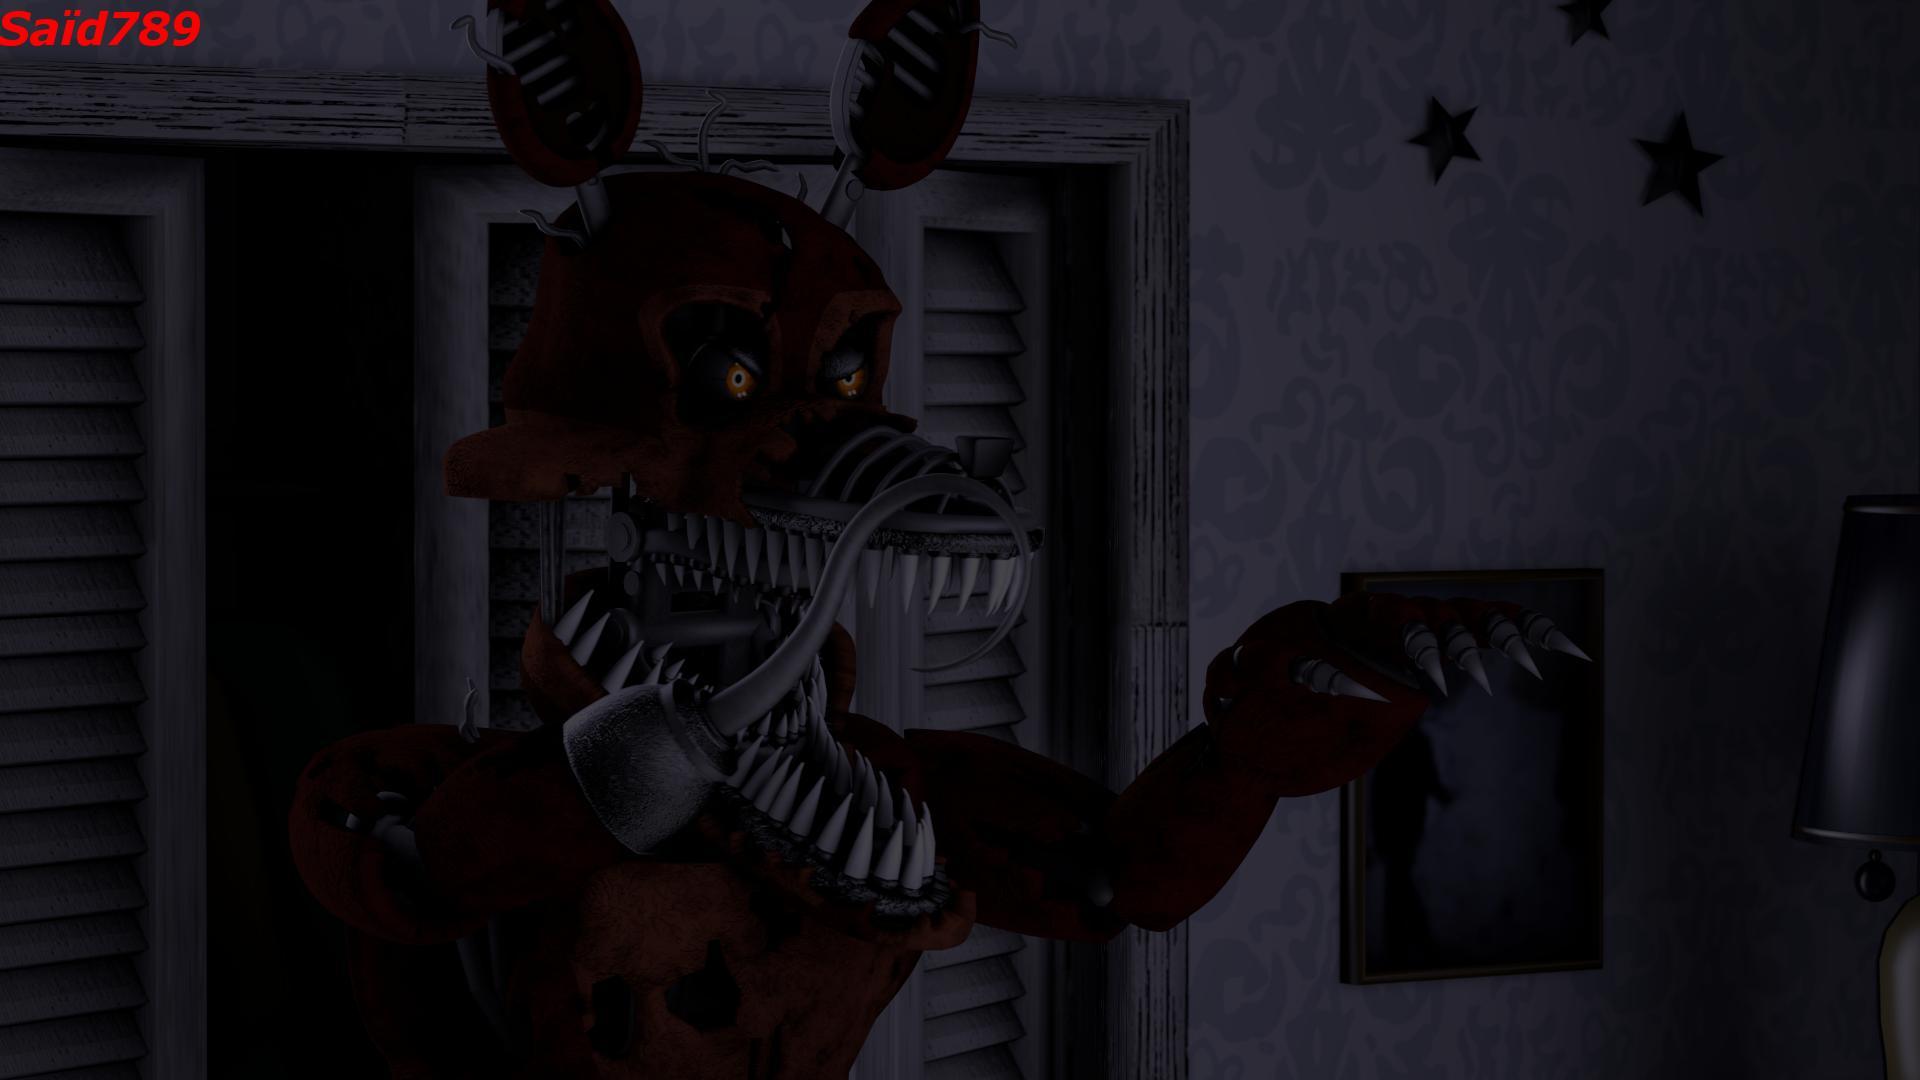 Nightmare Foxy Wallpaper, image collections of wallpaper